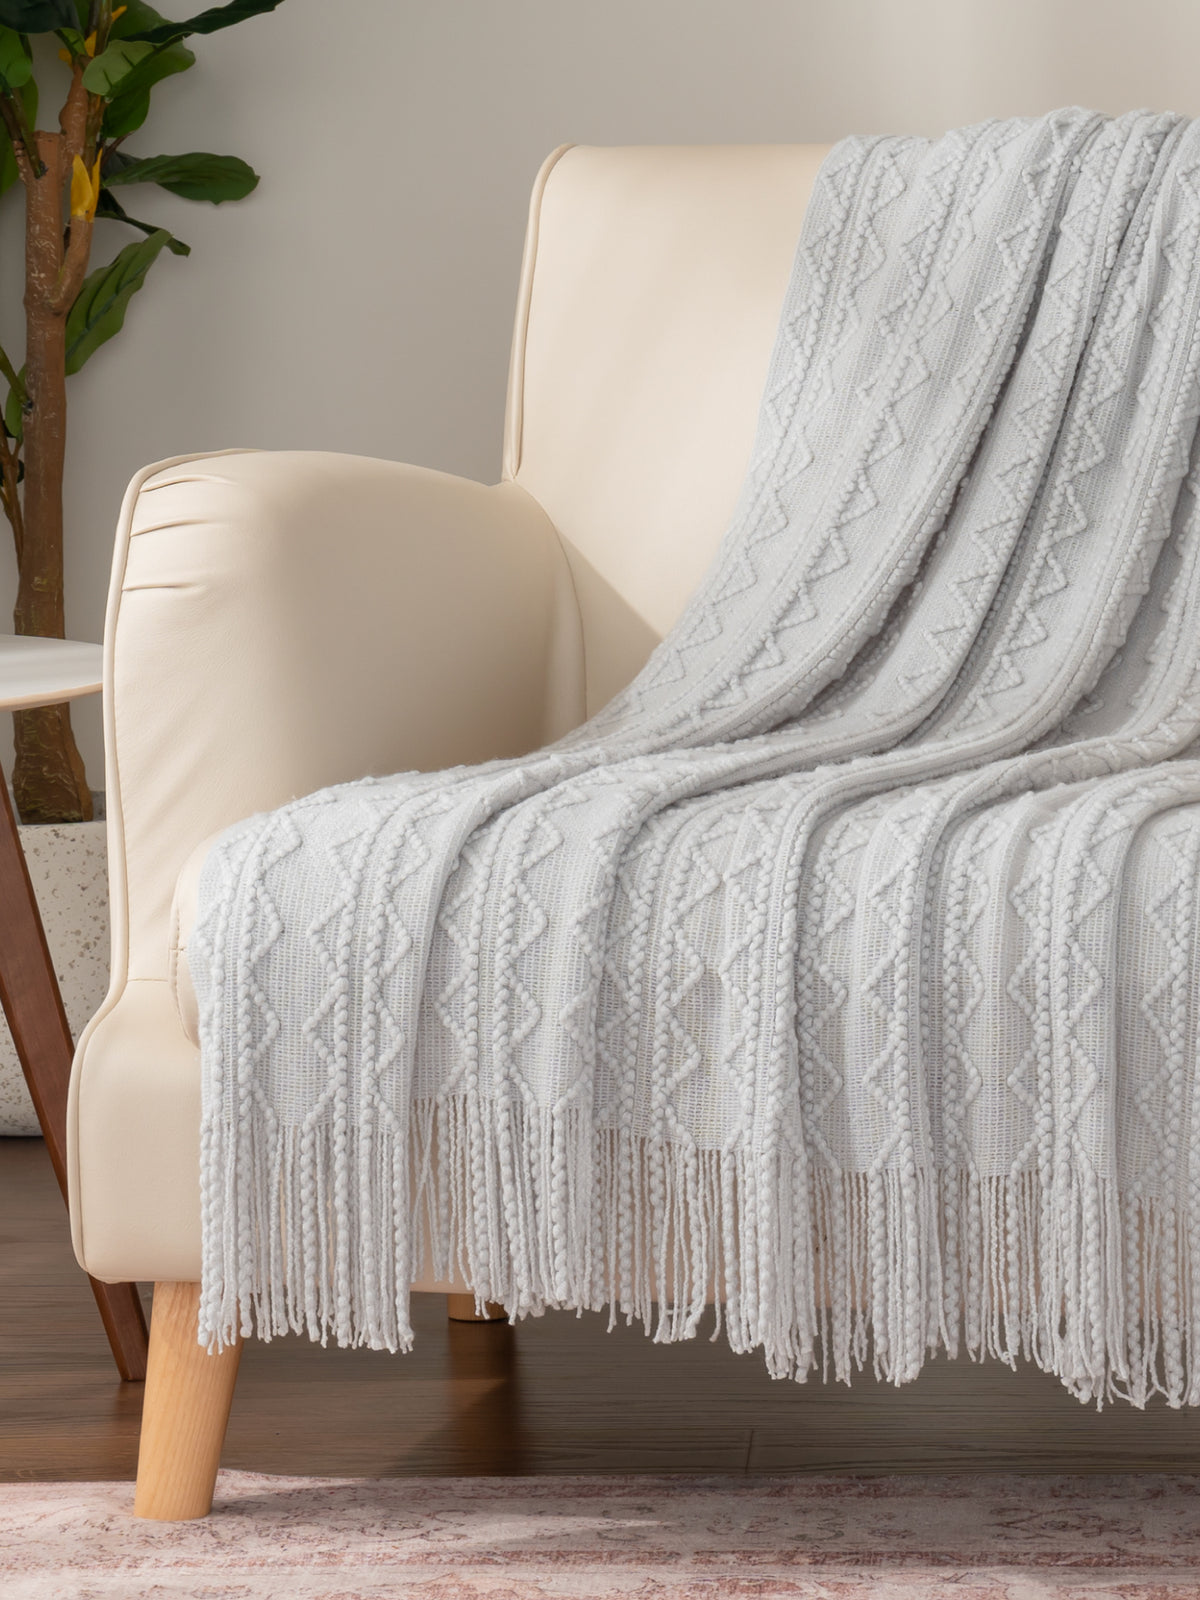 New arrivals collection image featuring our Tassel Knit Throw in Grey draped over a beige leather chair.